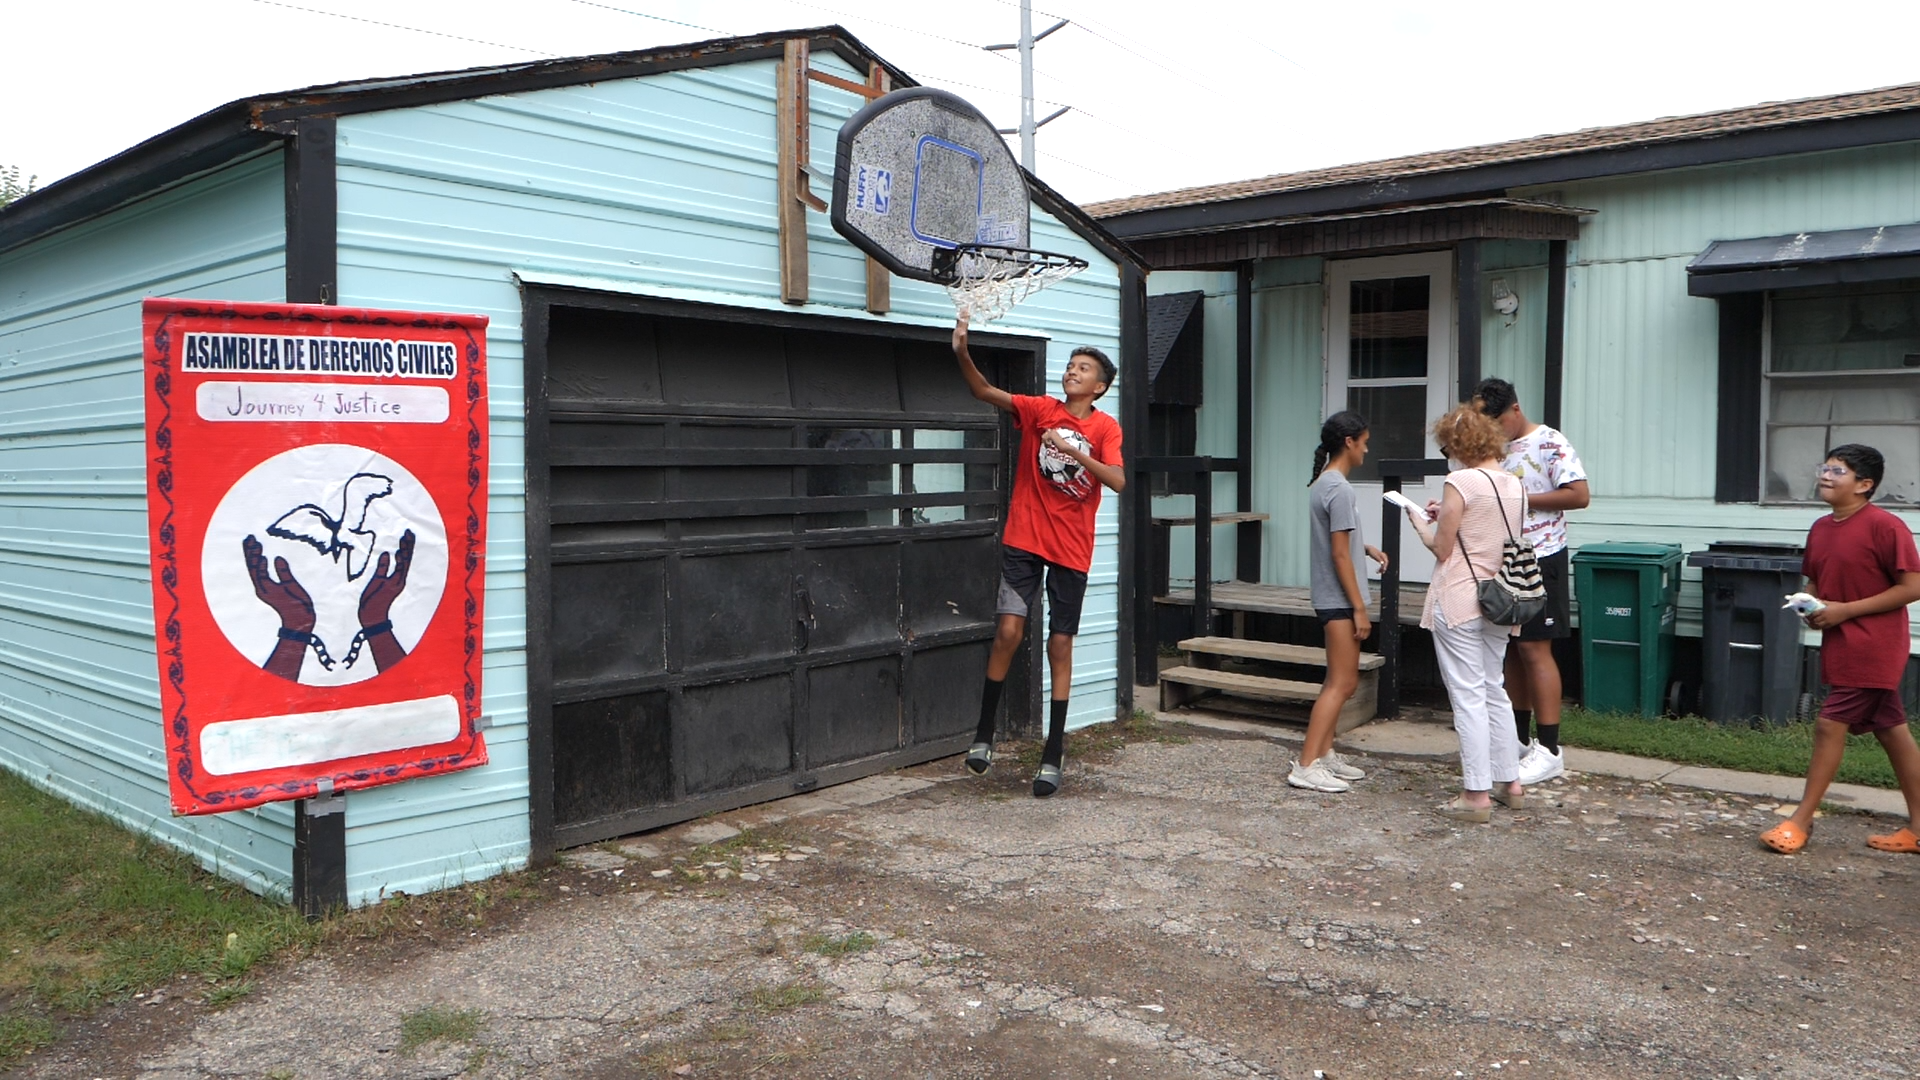 A photo of kids talking in front of a teal-colored manufactured home and one boy jumping up to hit a basketball hoop. 